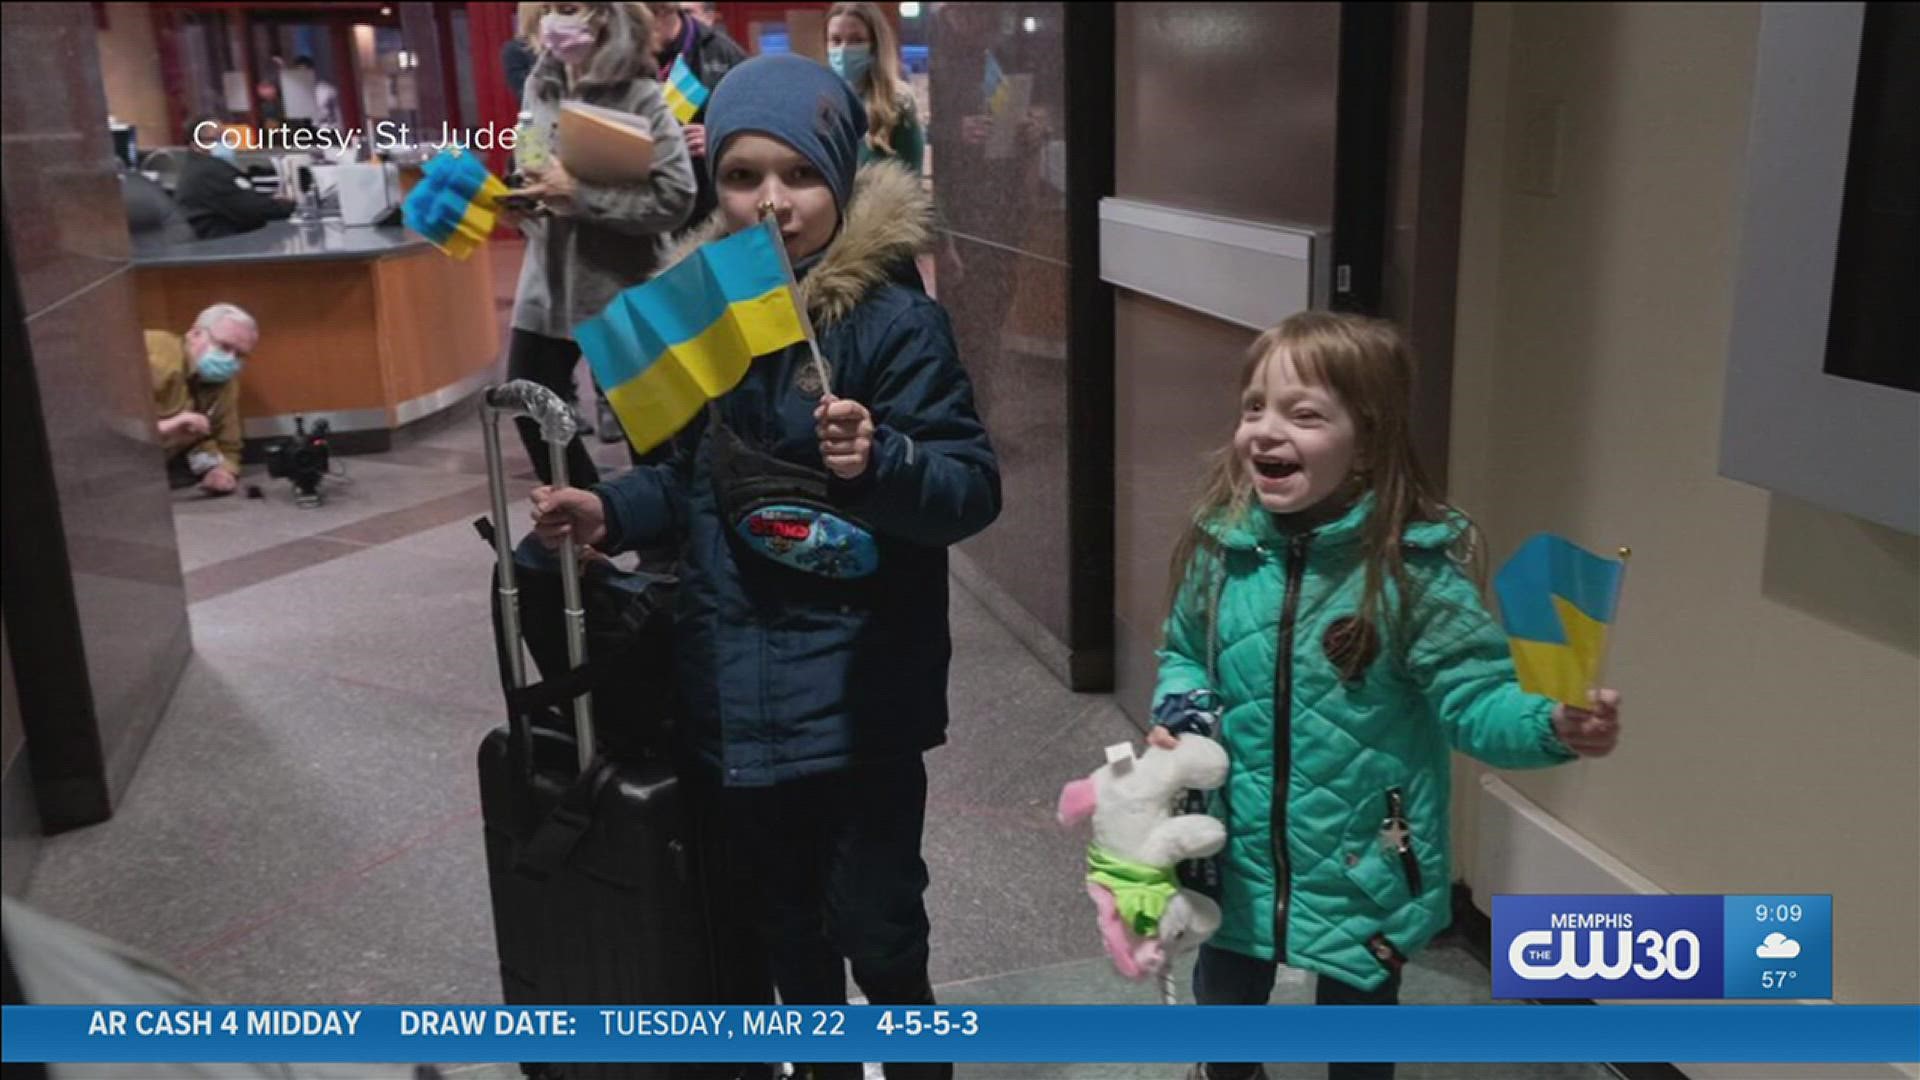 According to St. Jude, they're the first hospital in the U.S. to receive patients from Ukraine.